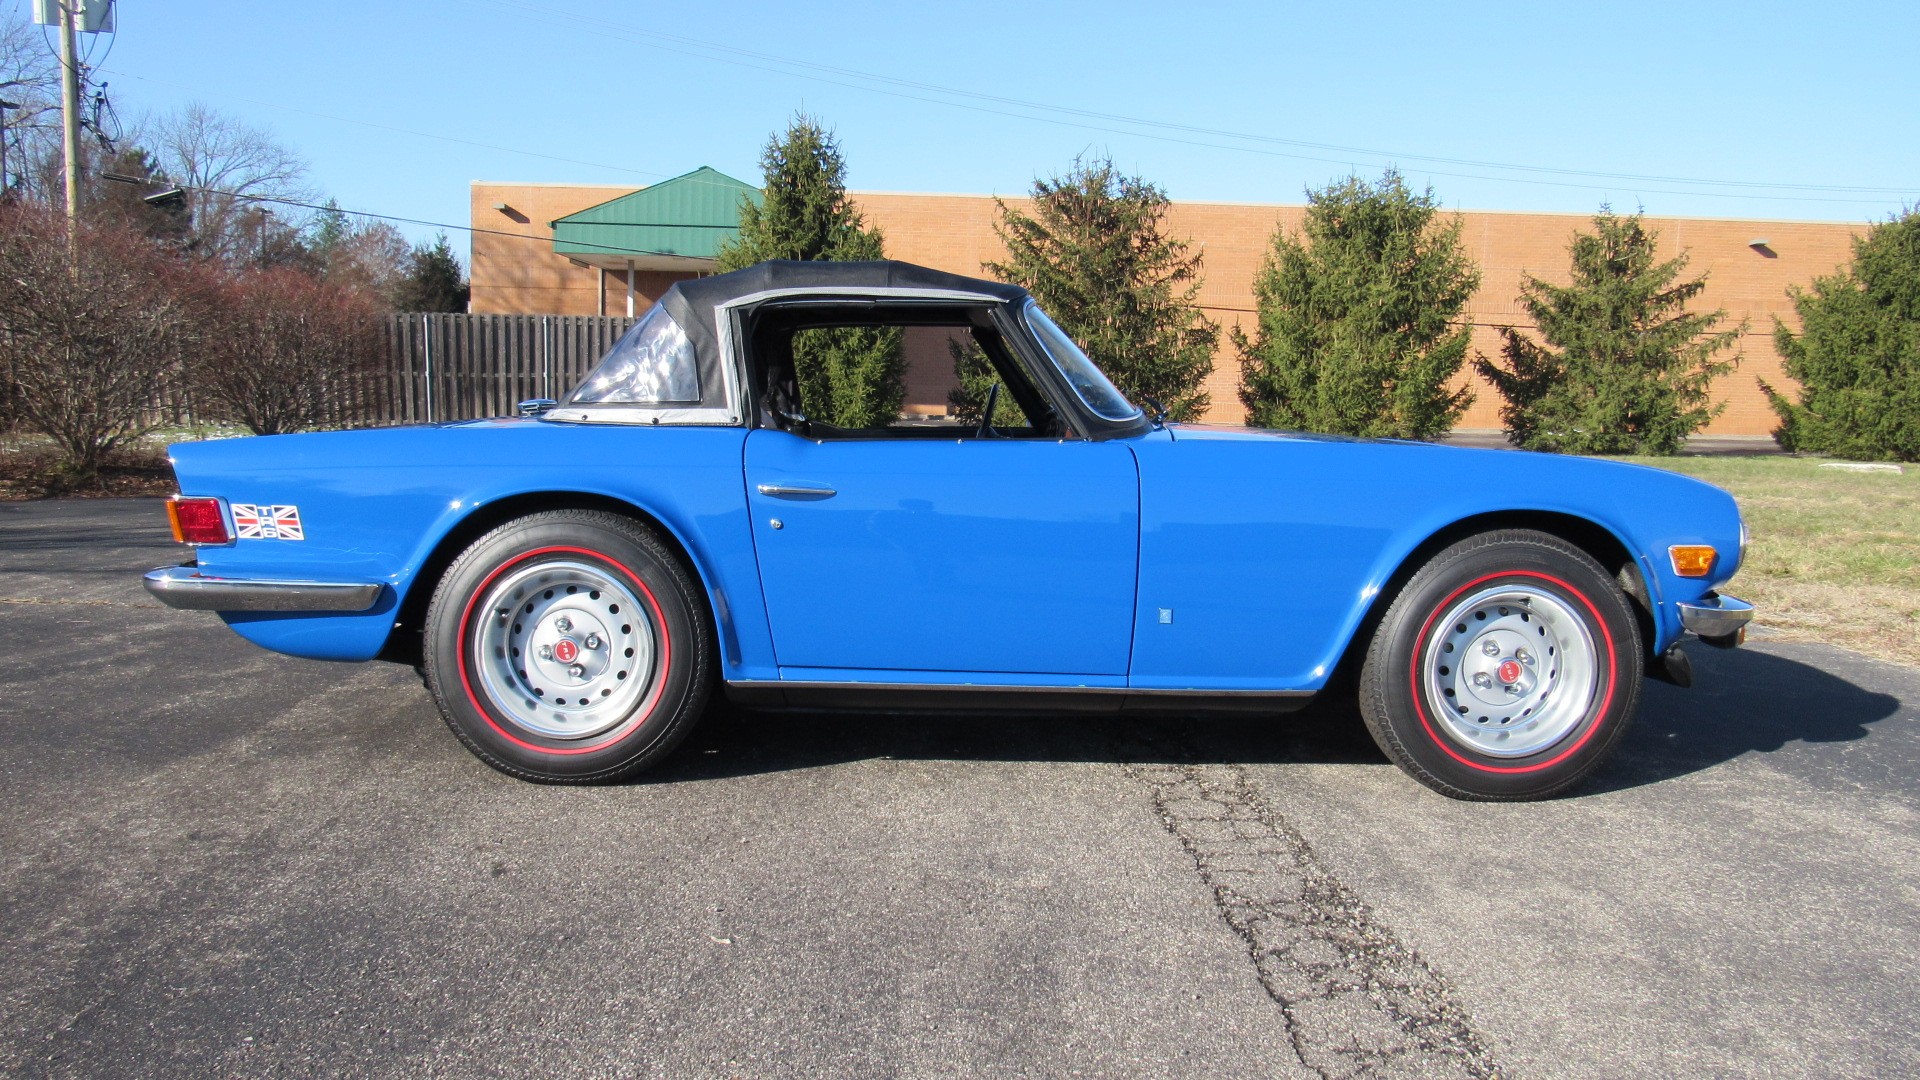 1976 TR6, 49K Miles, Factory Overdrive & Hardtop, SOLD!